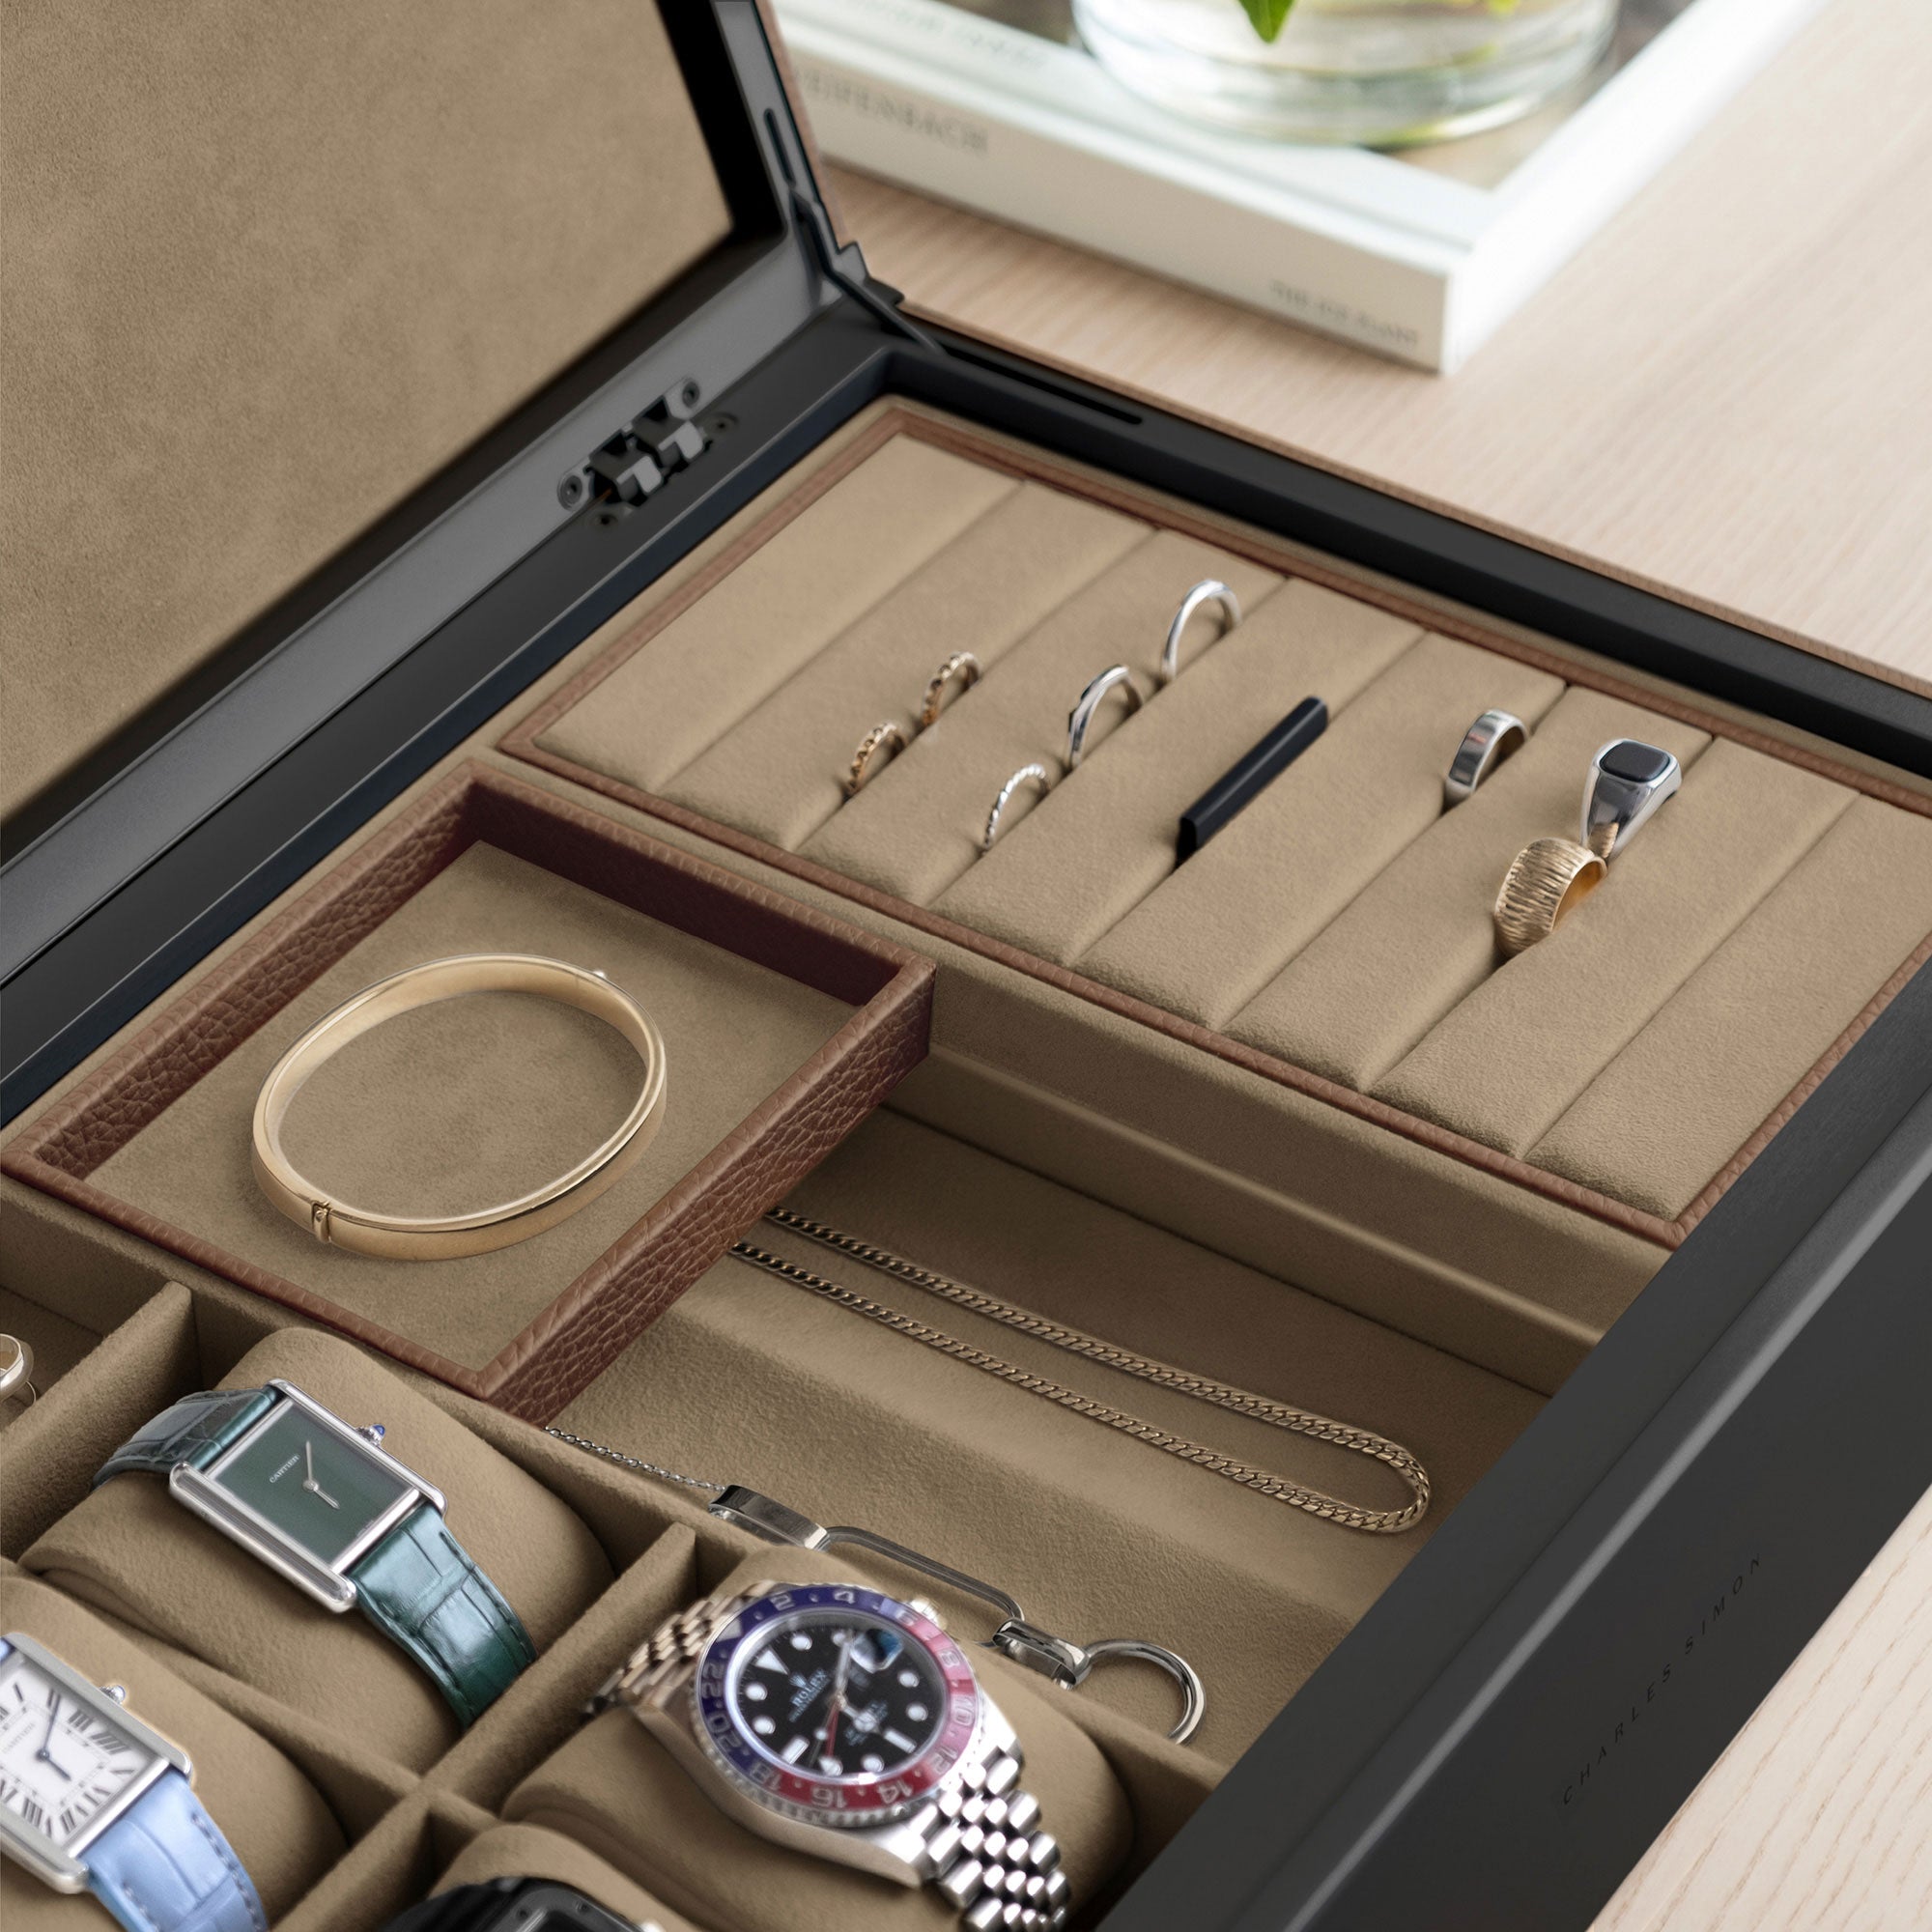 Detail photo of jewelry storage compartments and watch cushions of the Taylor 4 Watch and Jewelry box in tan leather and camel interior.